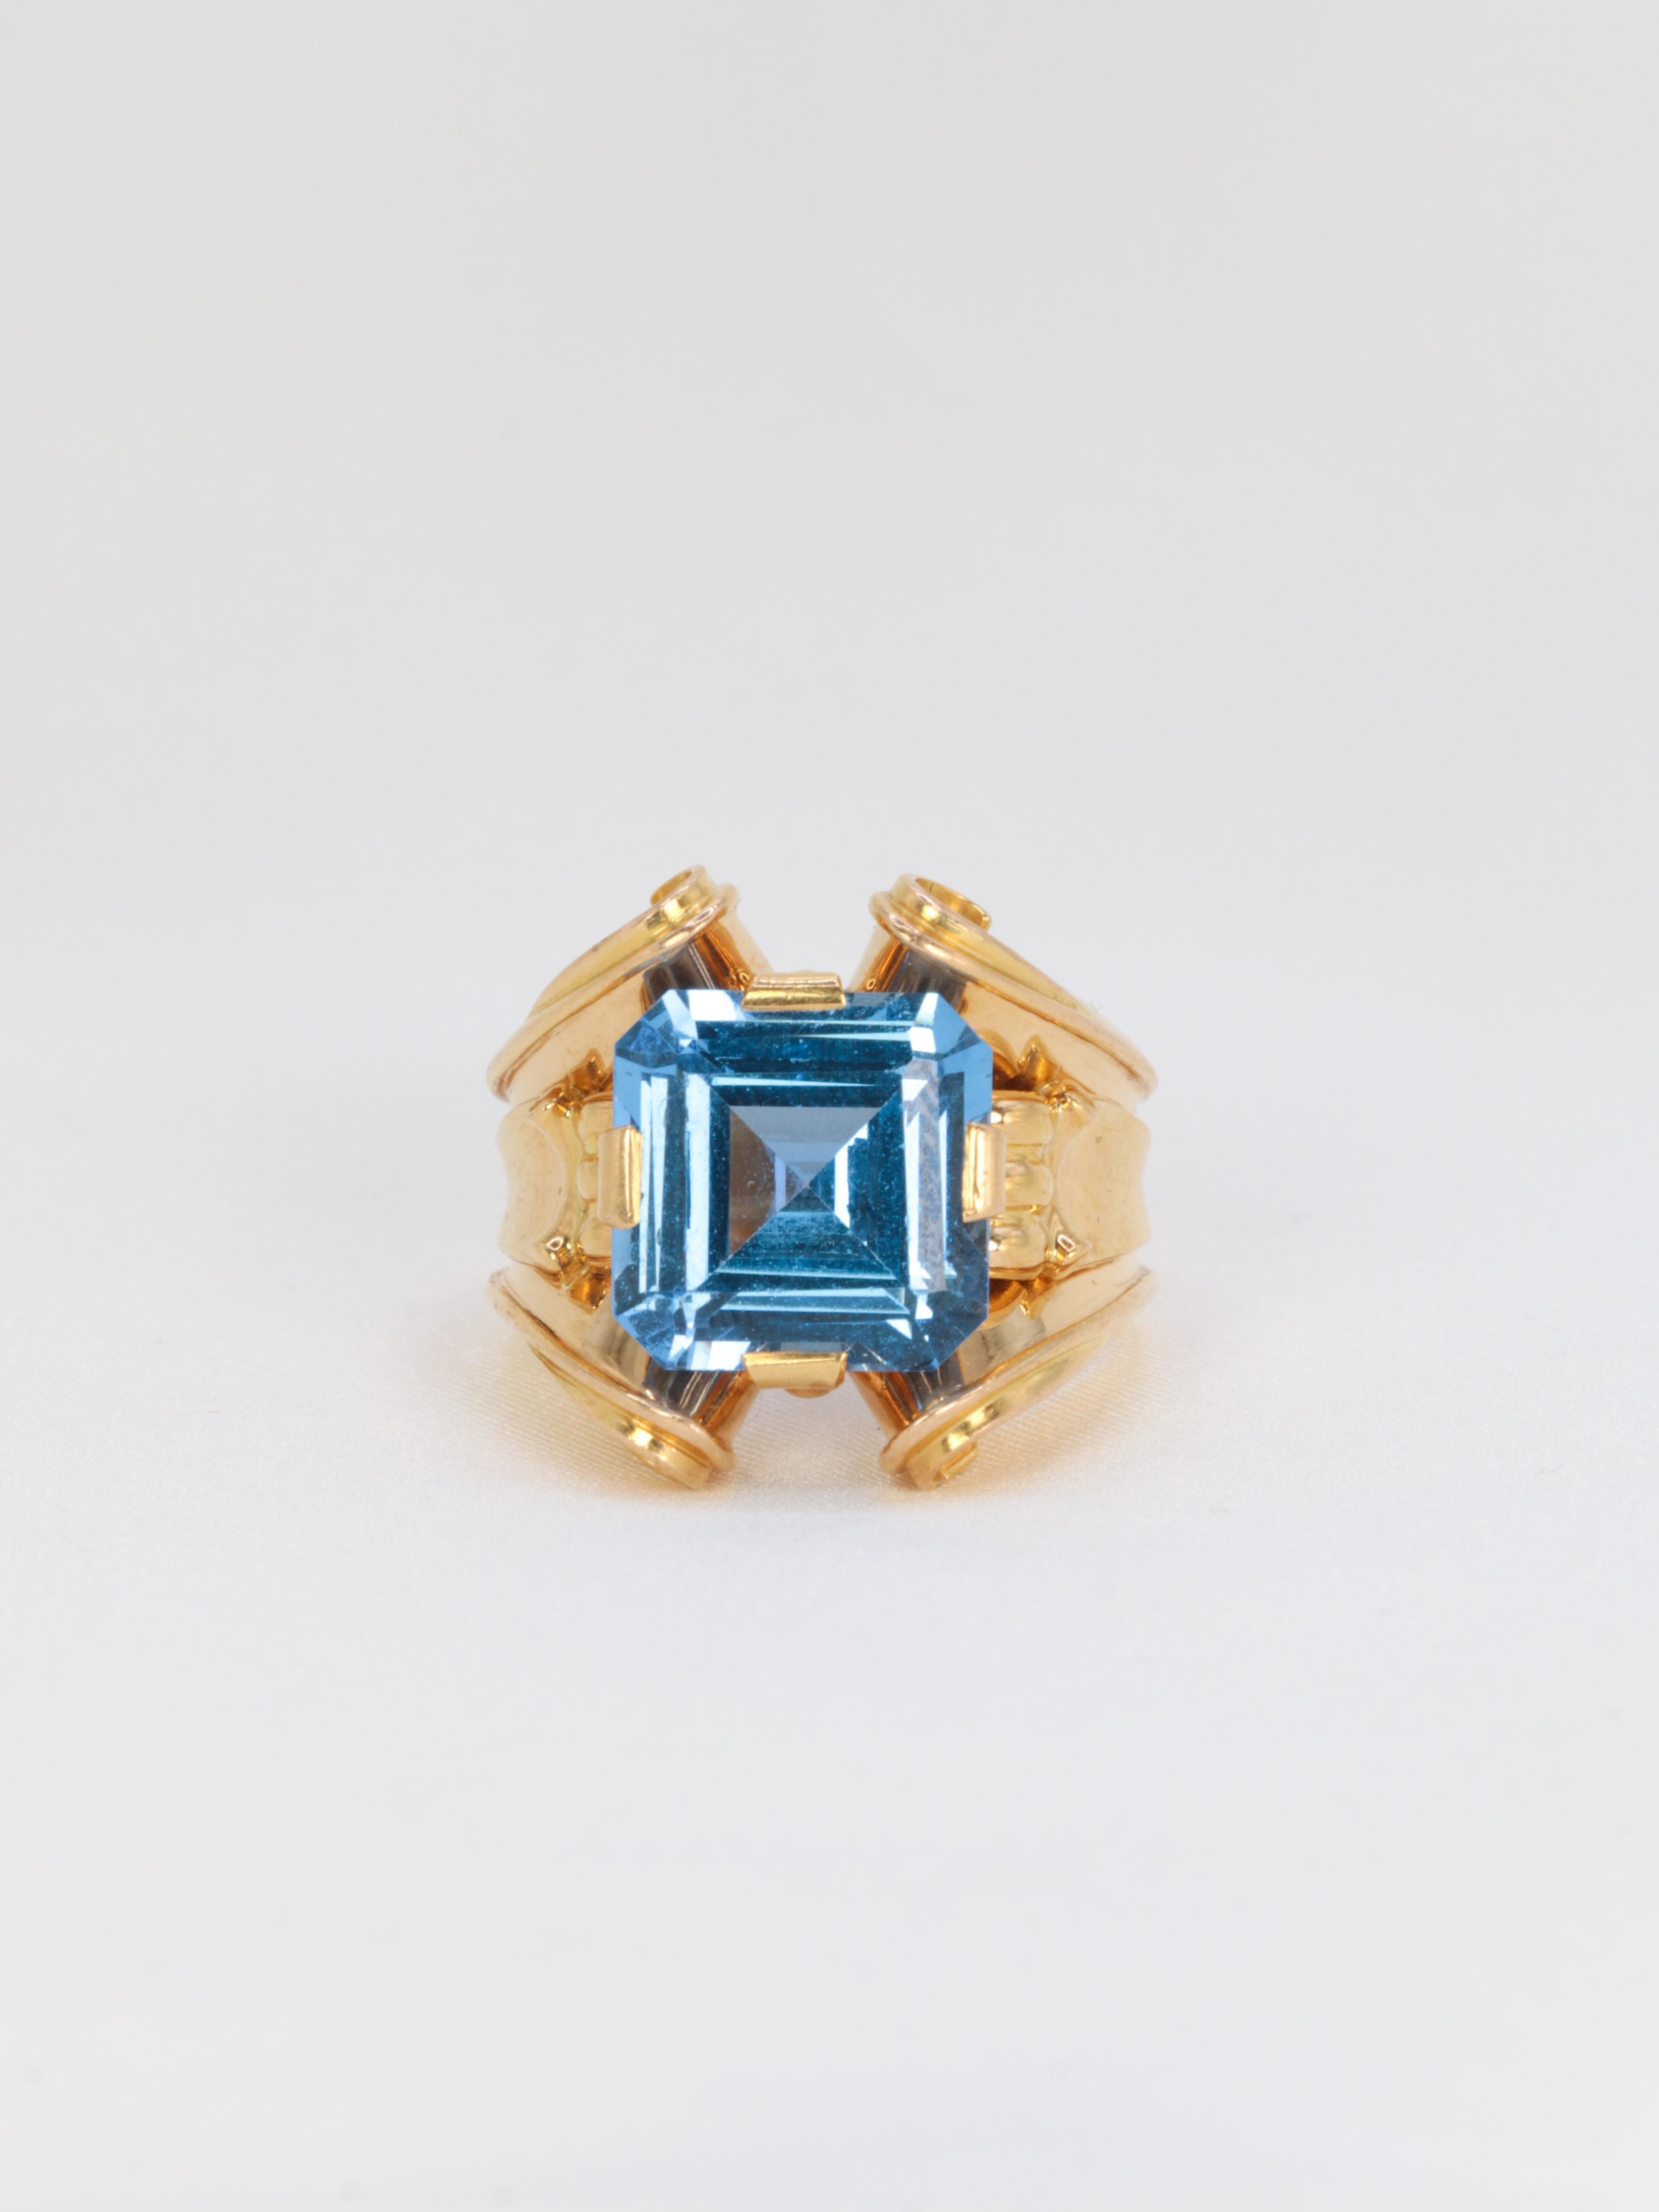 18Kt (750°/°°) Cocktail ring set in its center with a probably synthetic blue spinel stone weighing approx. 8 carats.
French work from the 1960s.
Presence of the eagle head hallmark for 18-carat gold and the maker's hallmark.

Very good overall